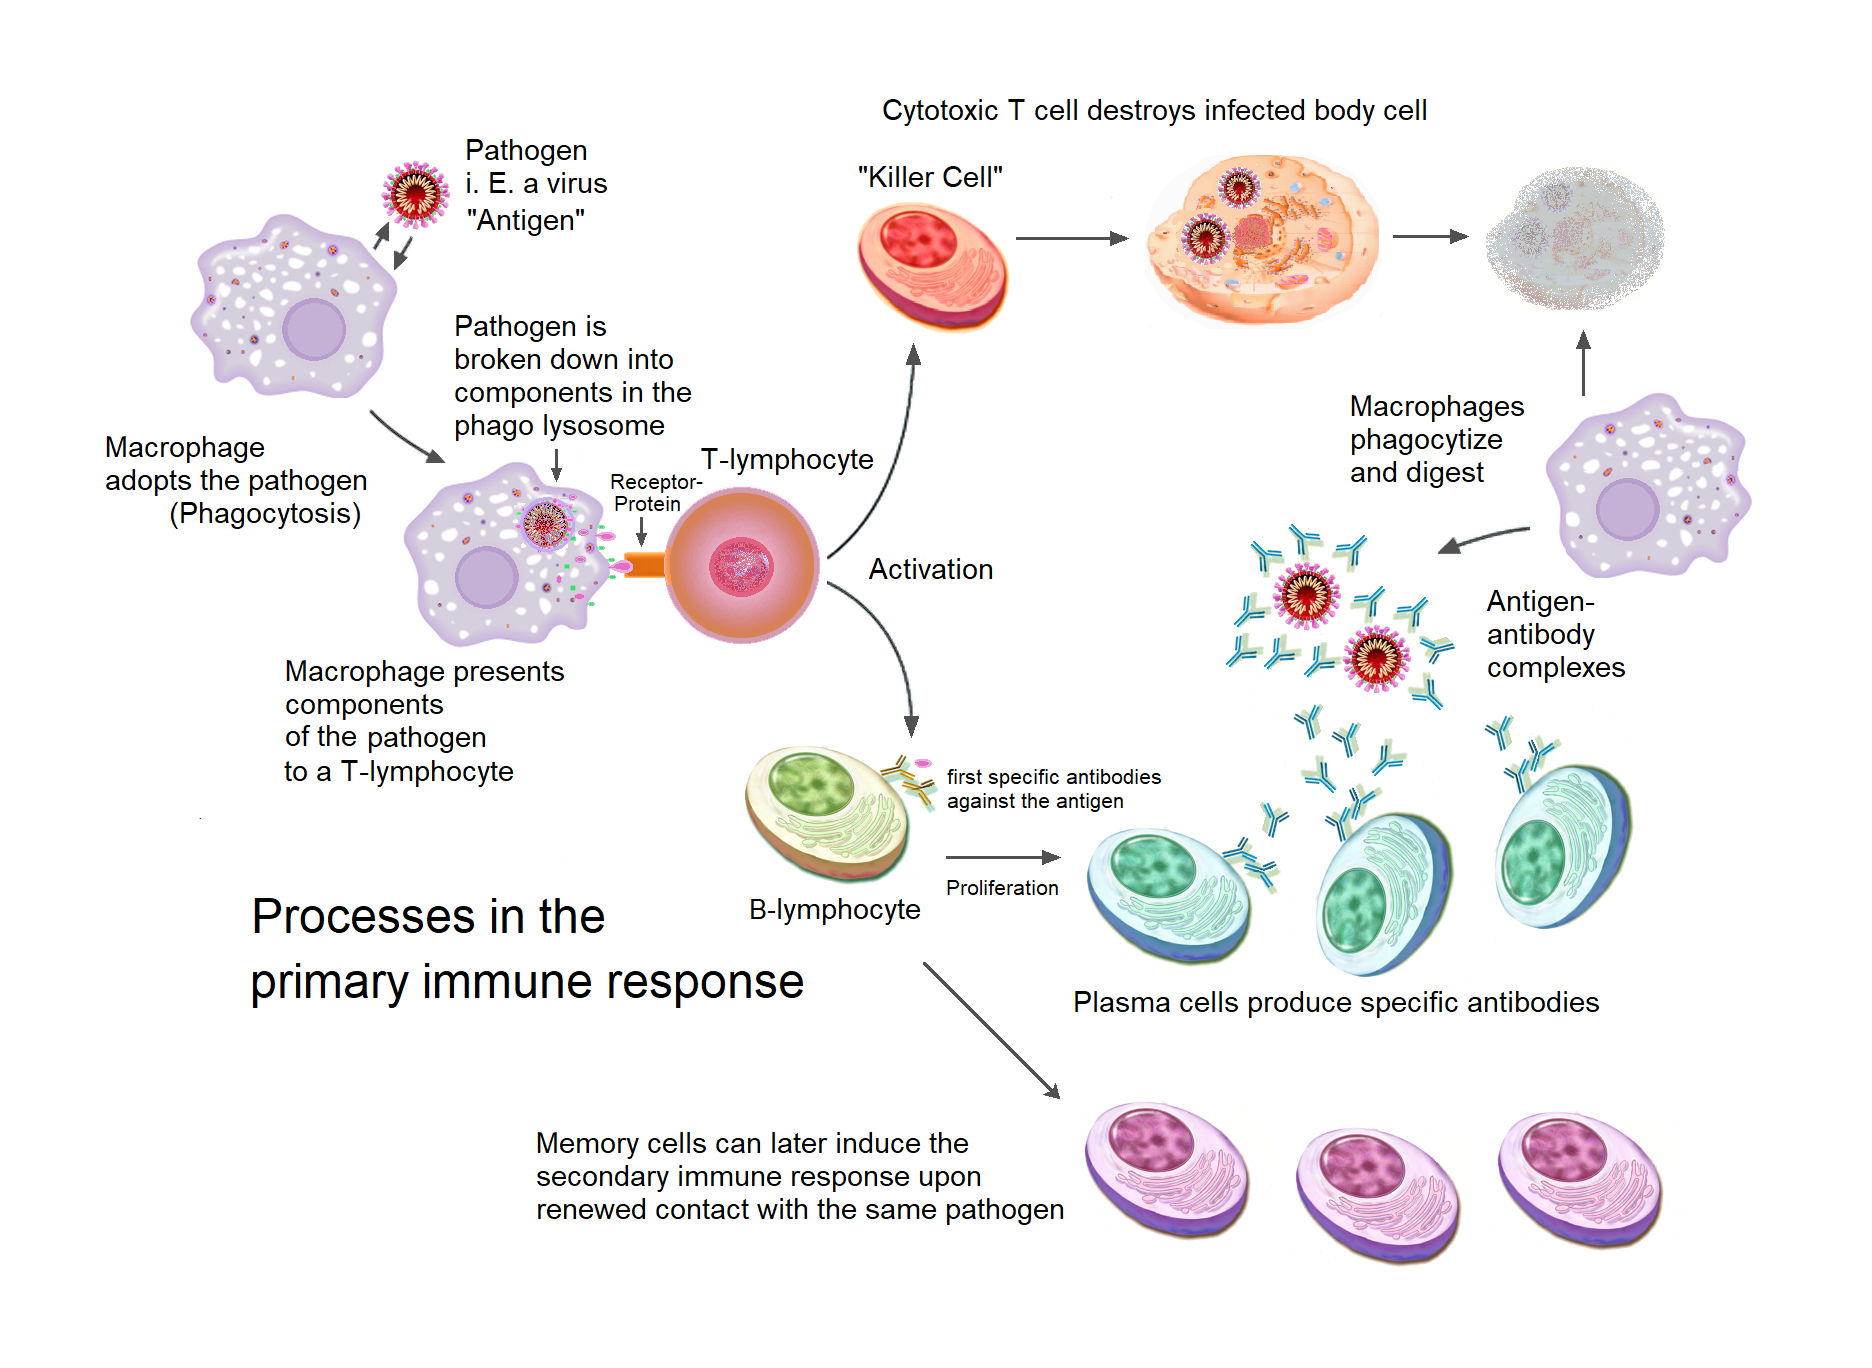 Overview of the processes involved in the primary immune response